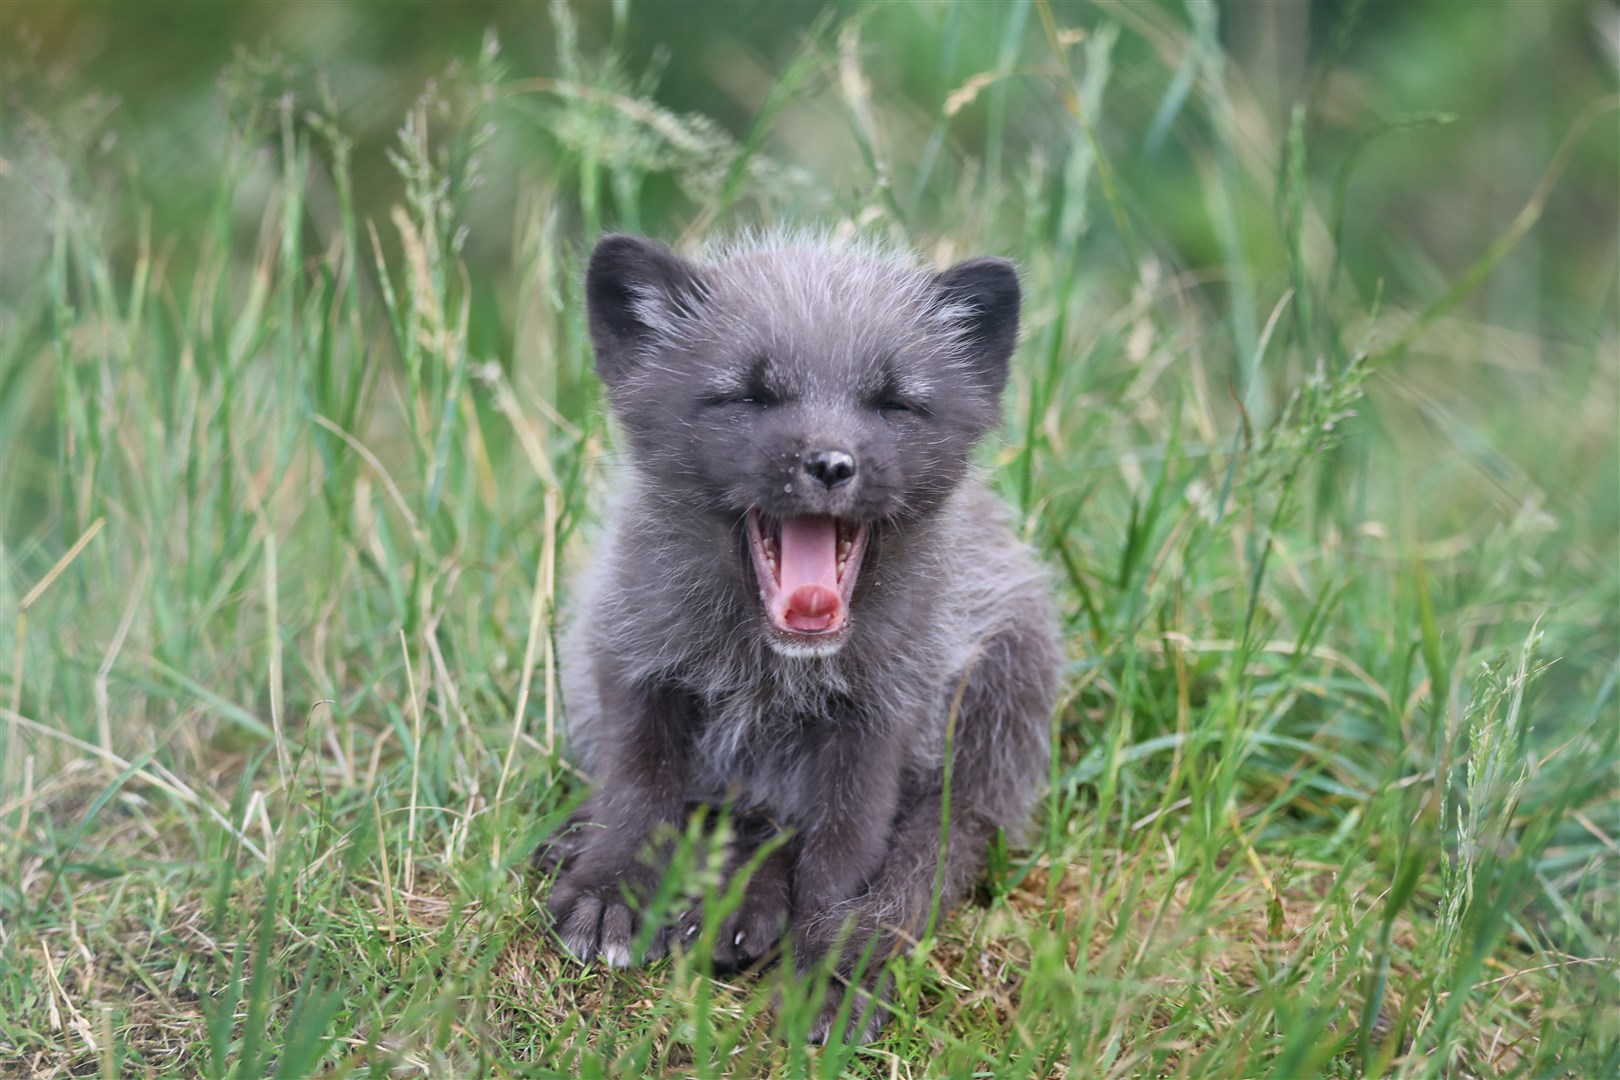 It is tiring work being a fox cub. Picture: RZSS